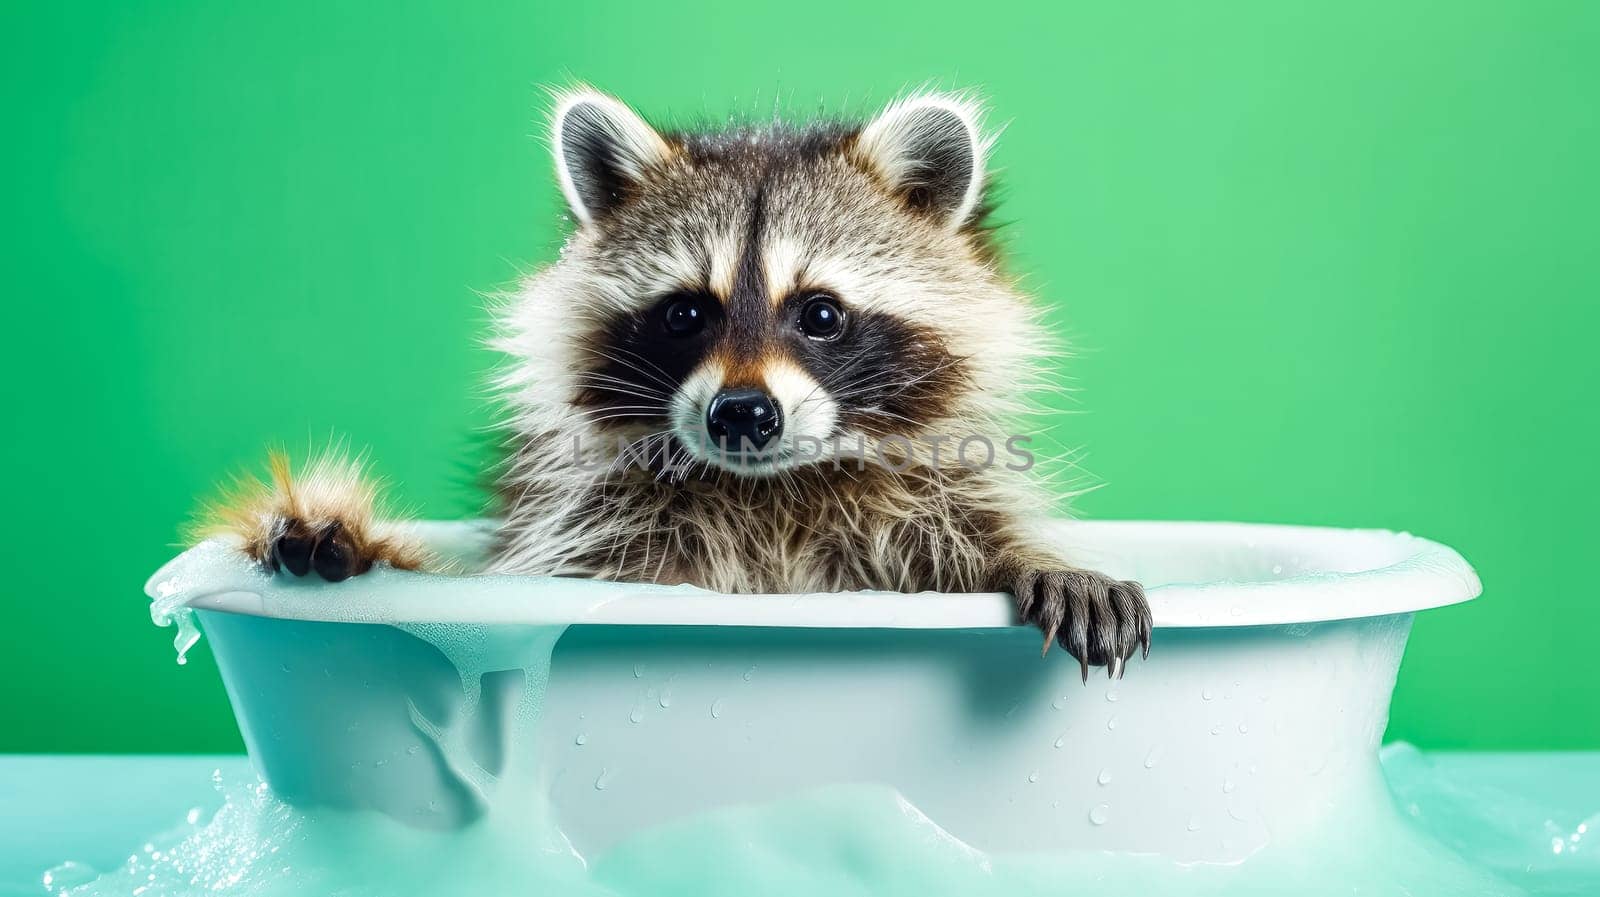 The raccoon in the bathtub against the green background by Alla_Morozova93